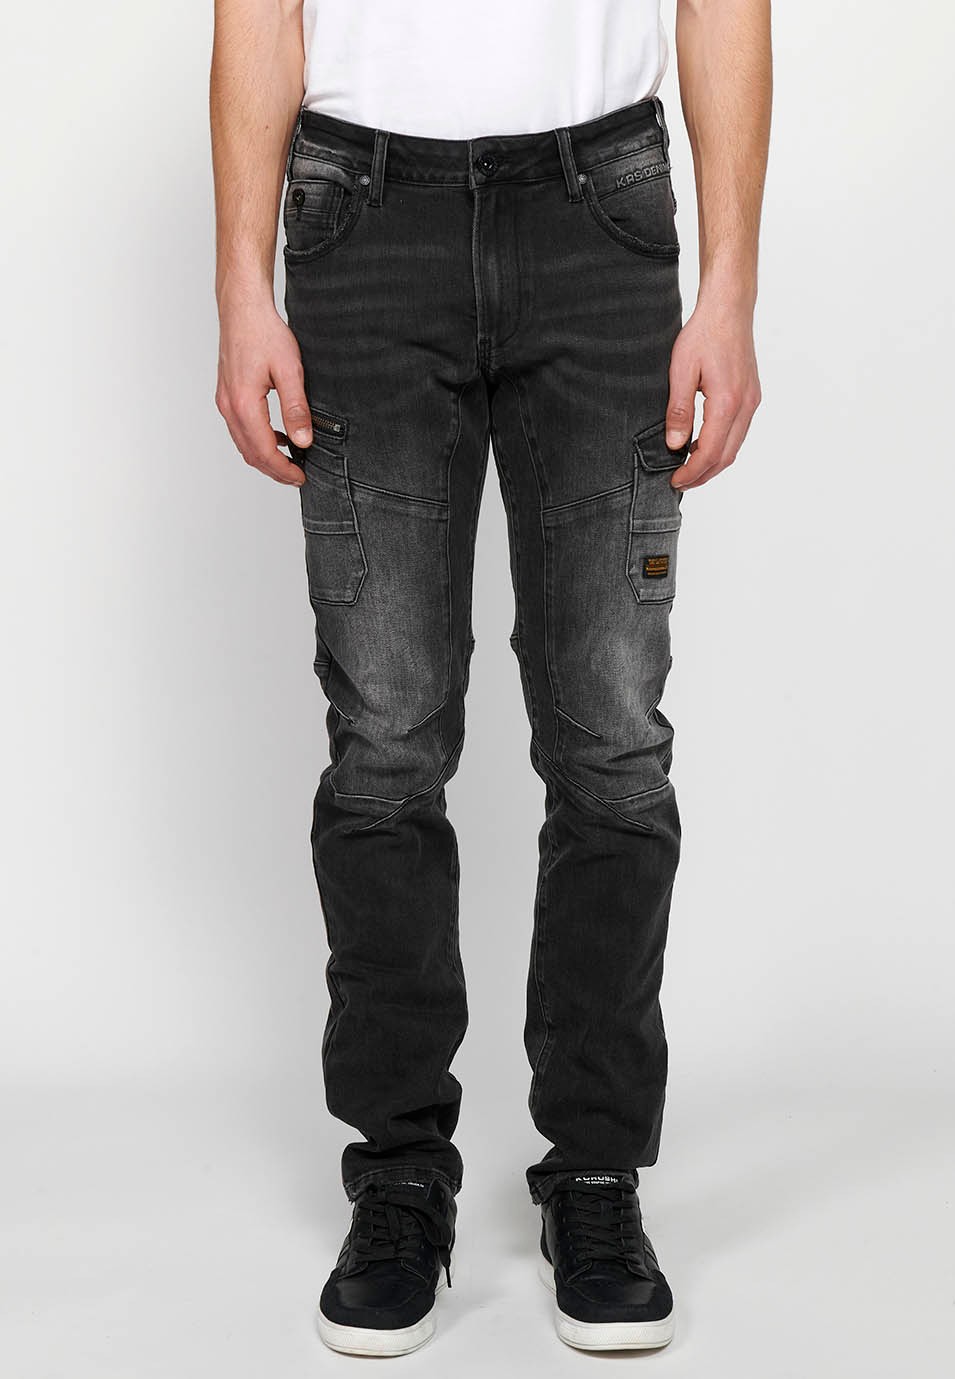 Long denim pants with front closure with zipper and button and pockets, two sides in Black for Men 1